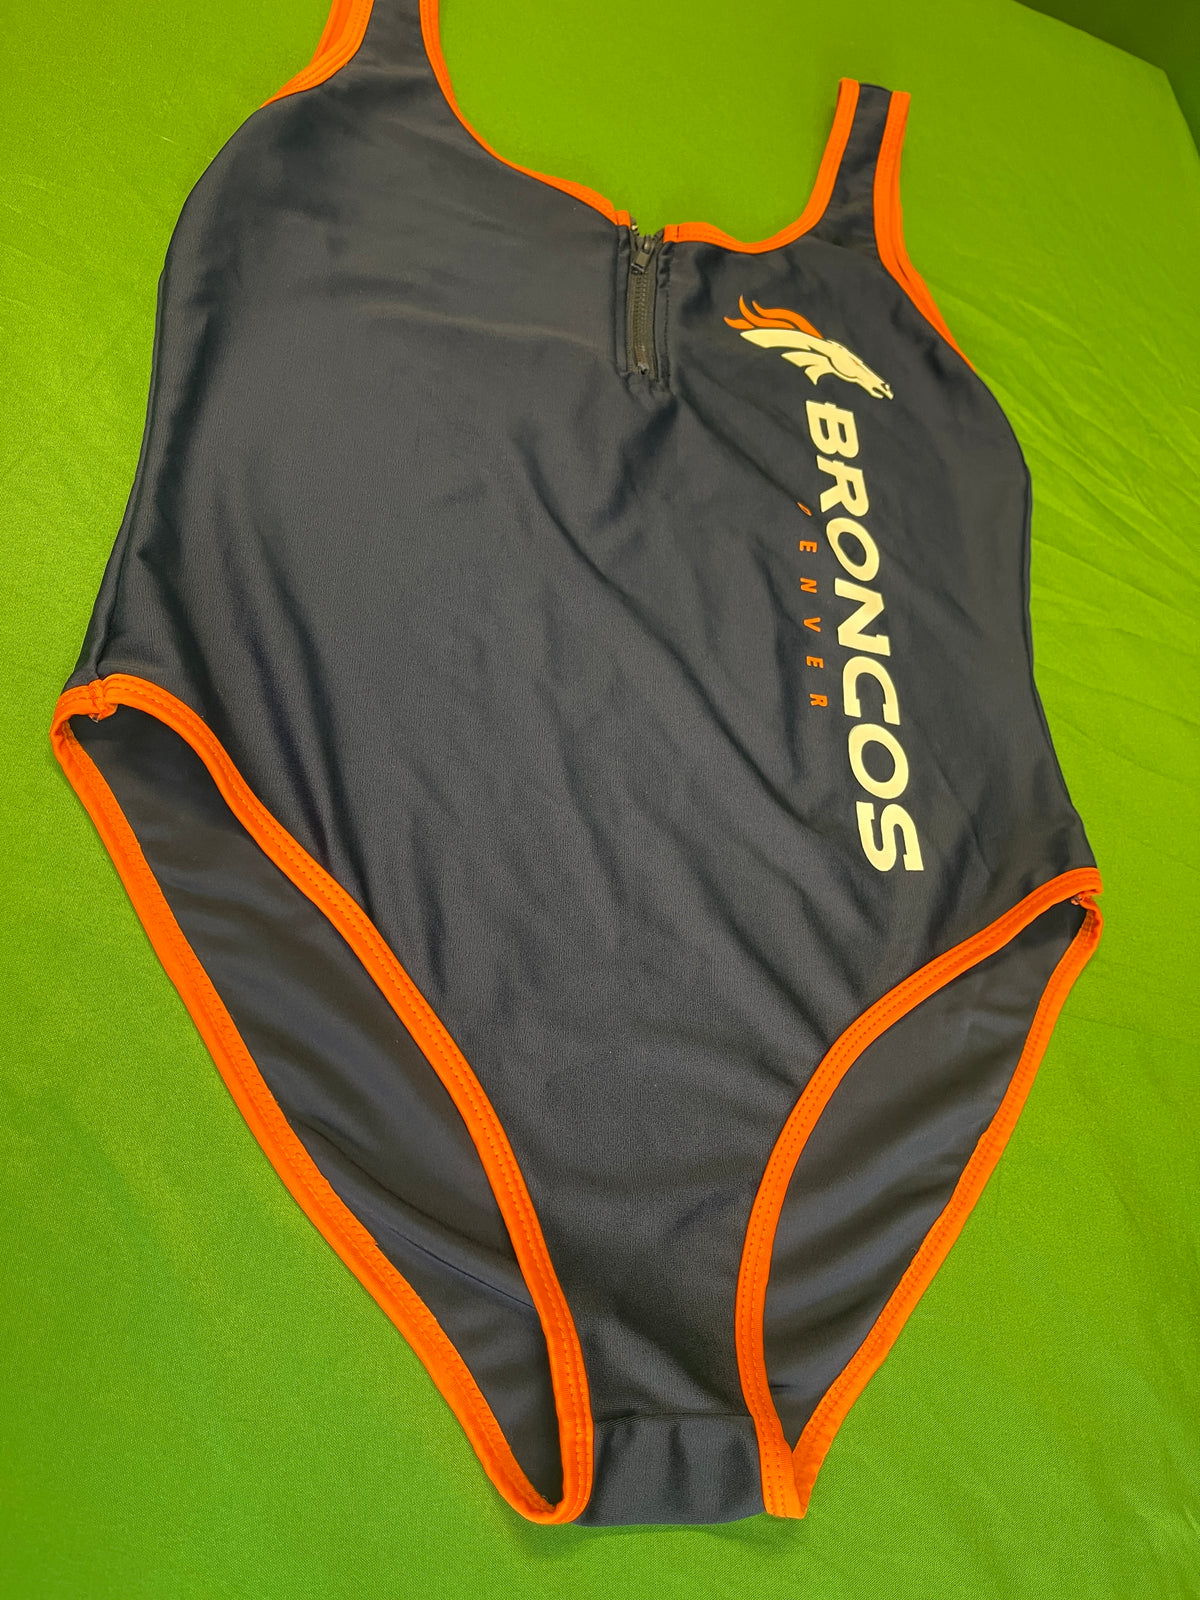 NFL Denver Broncos One Piece Swimsuit Swimming Costume Women's Large